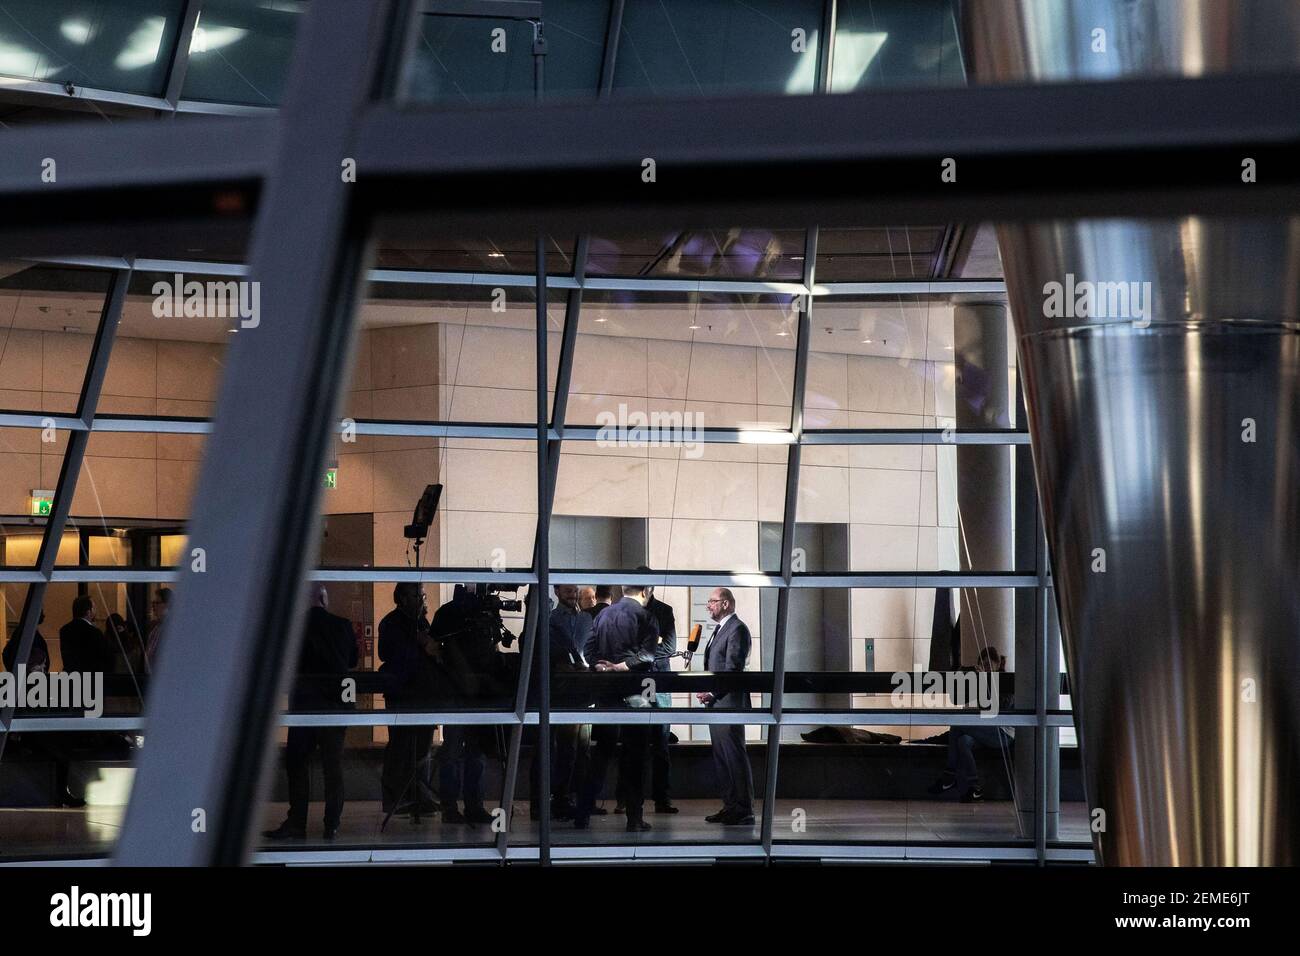 Former leader of the German Social Democratic Party Martin Schulz (SPD) is giving an interview to members of the media, after his party's parliamentary group meeting at the Bundestag in Berlin, Germany, February 12, 2019. (Photo by Omer Messinger) Stock Photo